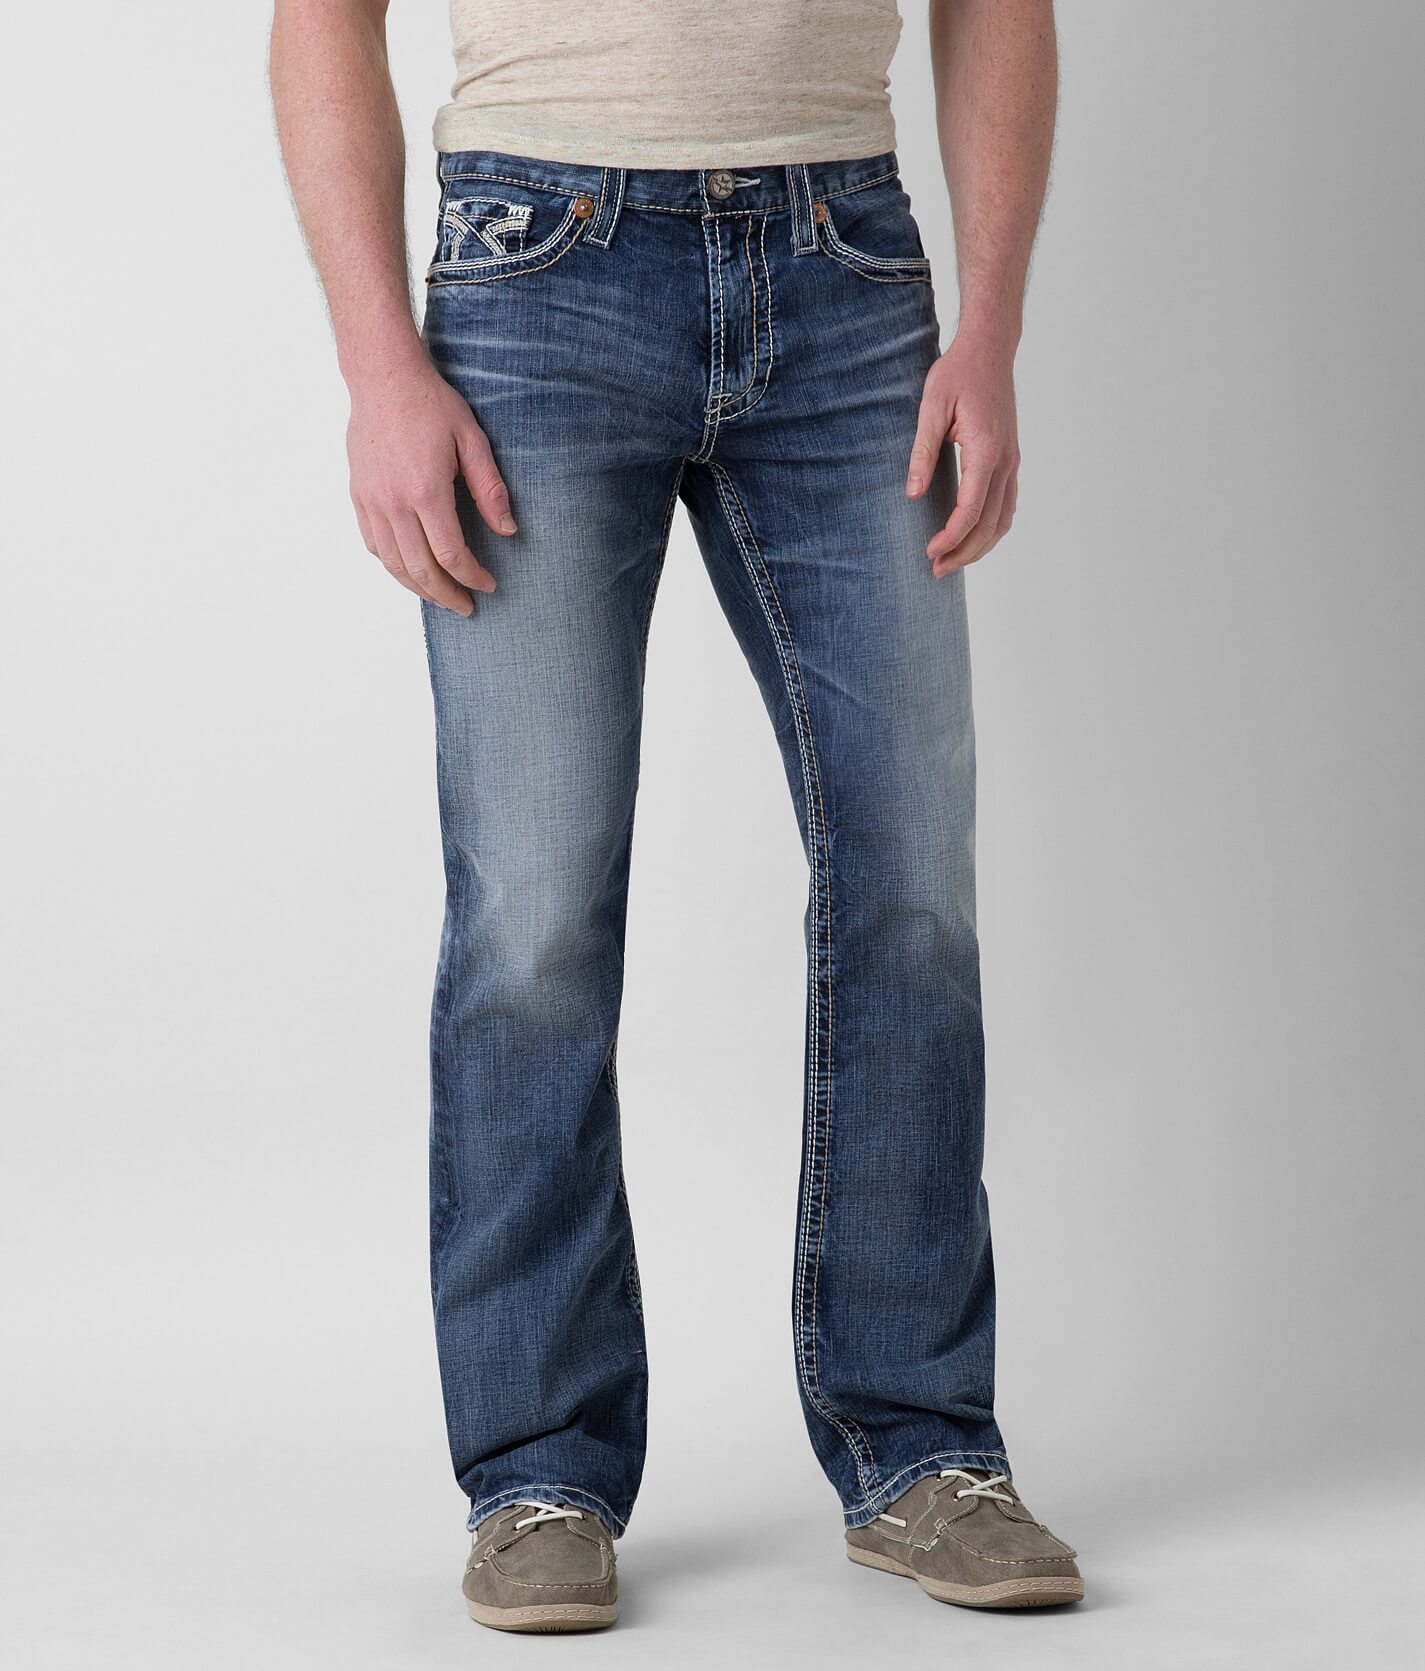 lee classic jeans 1889